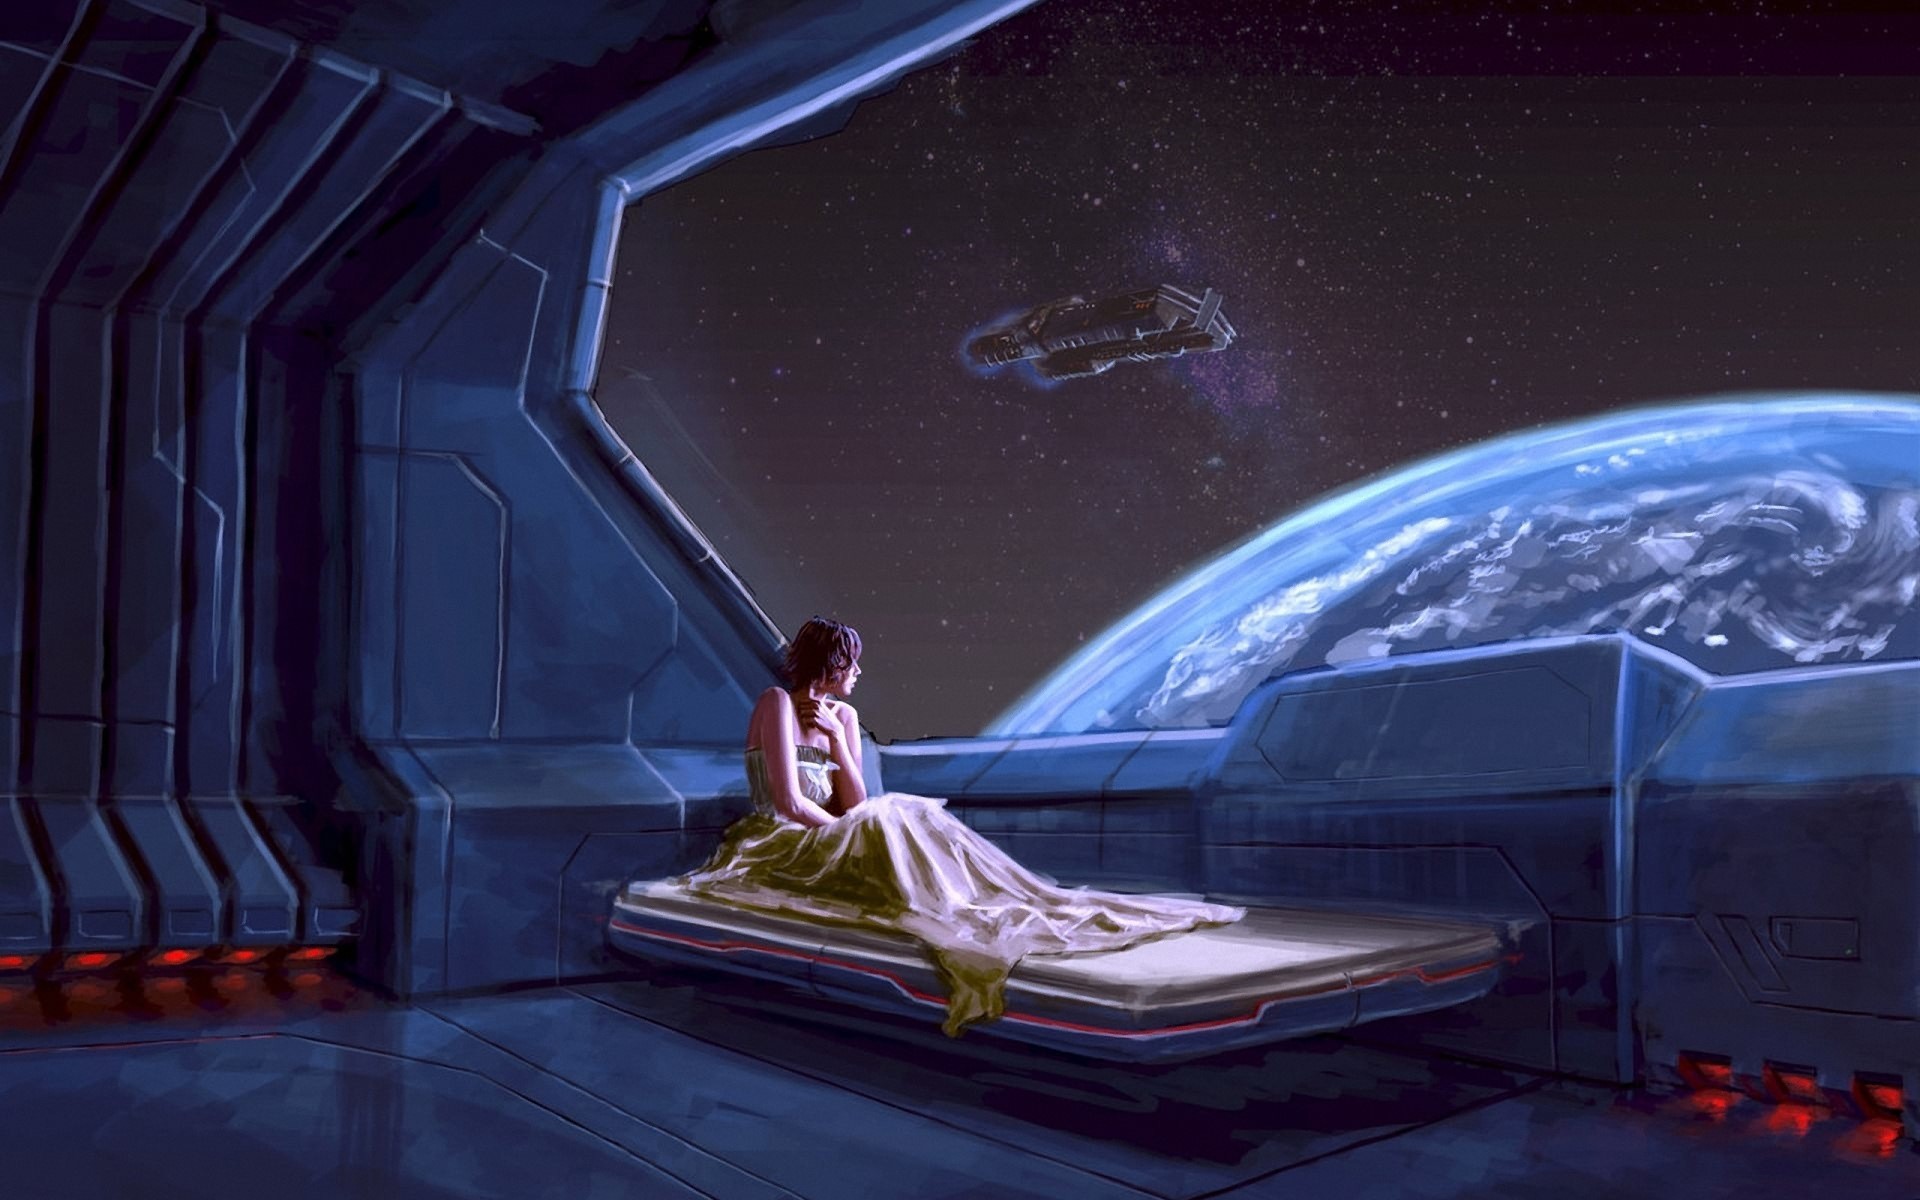 General 1920x1200 digital art bed space futuristic science fiction women brunette spaceship science fiction women artwork vehicle in bed looking out window